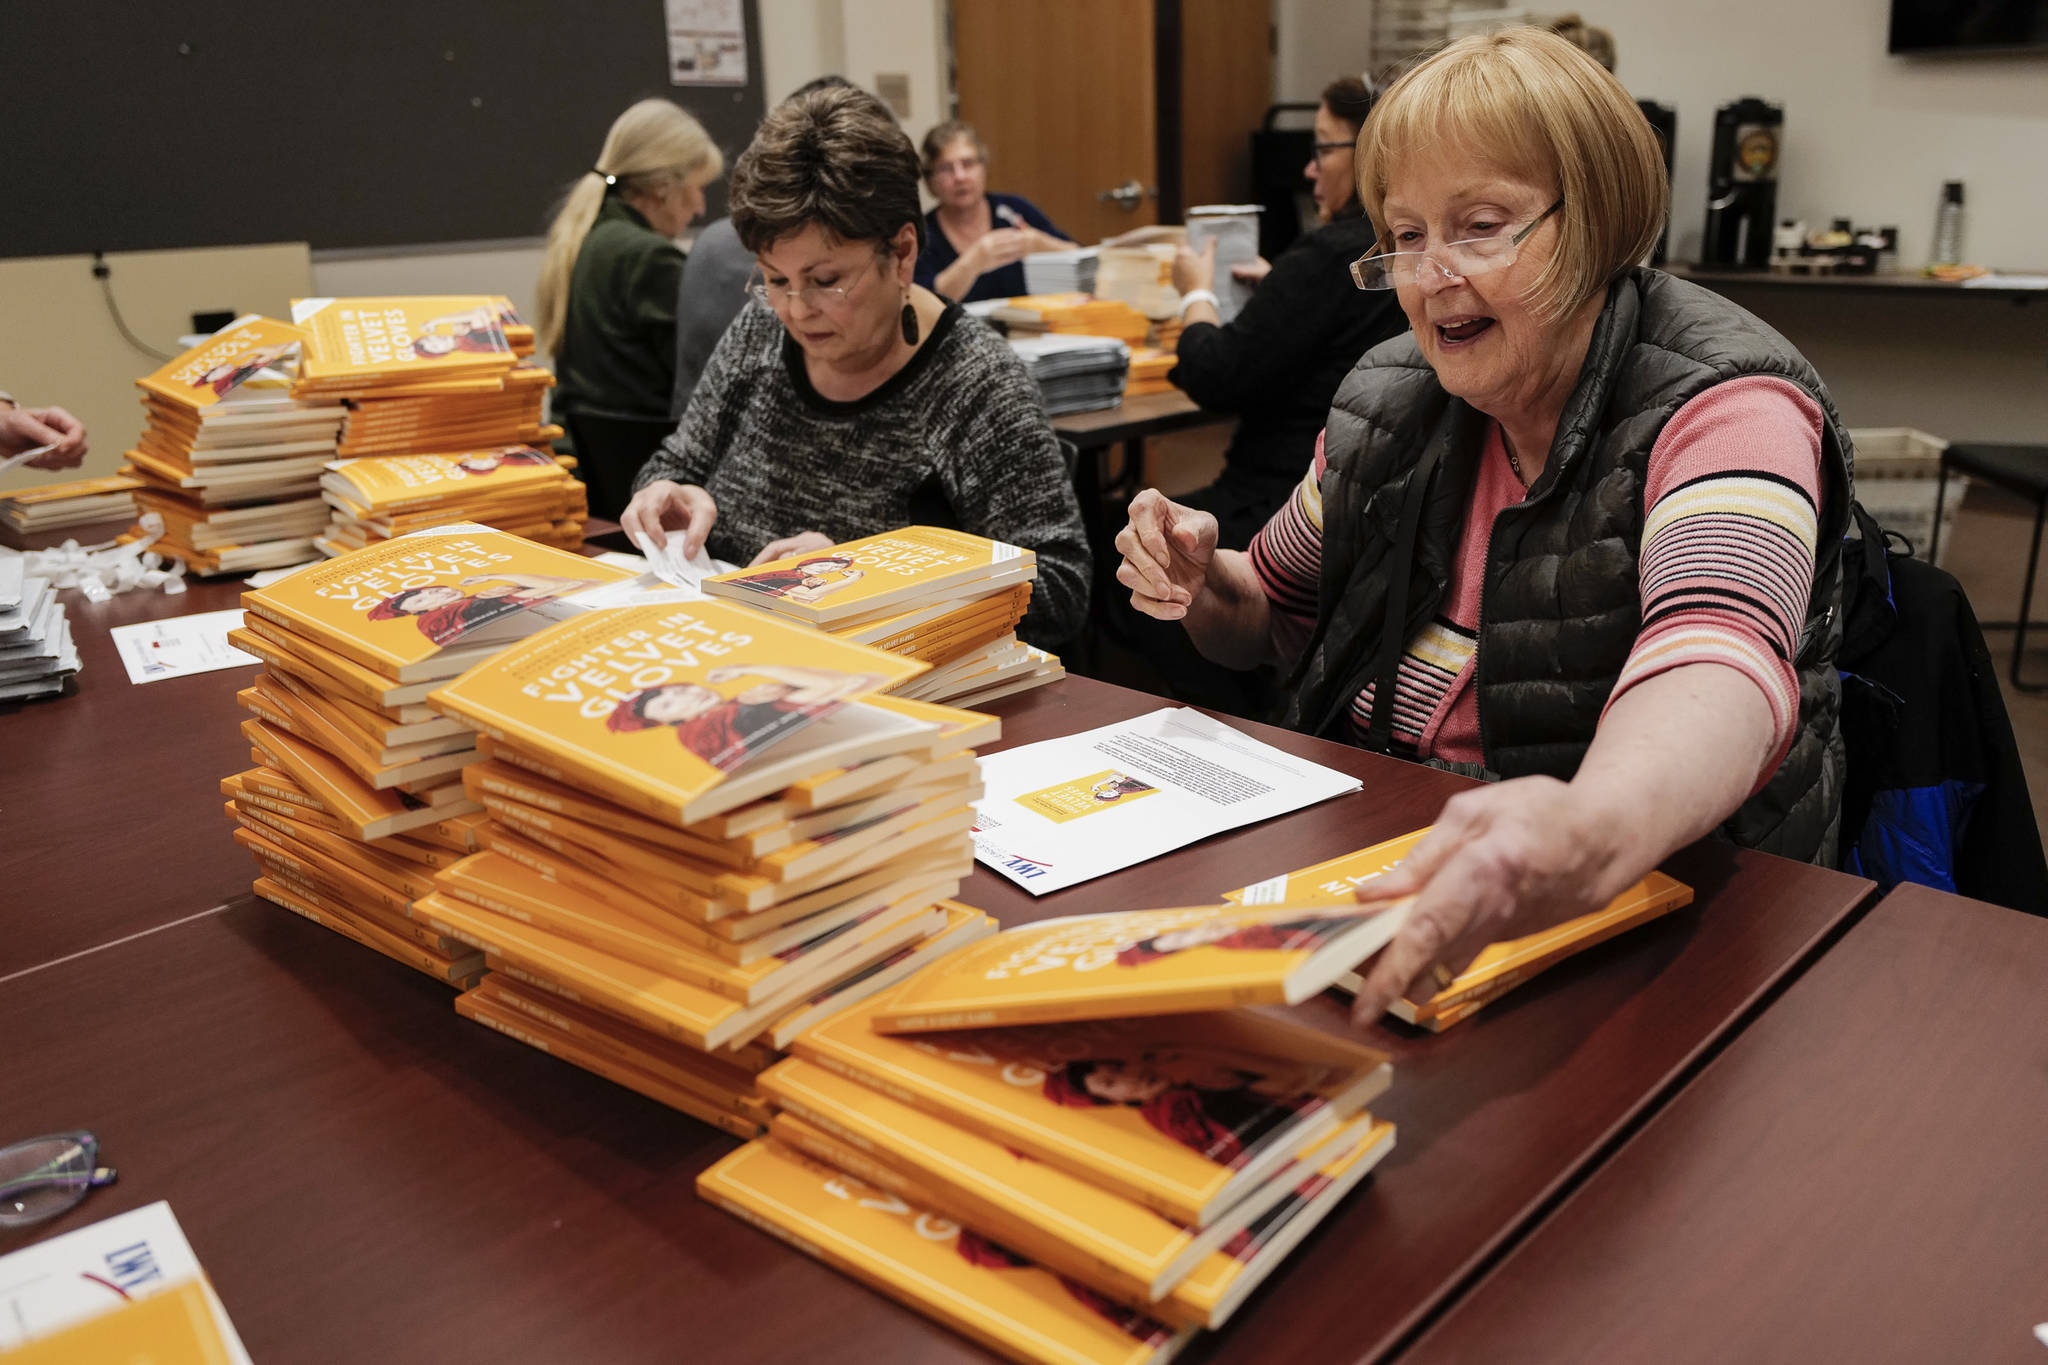 League of Women Voters of Juneau volunteers Karen Crane, left, Cheryl Jebe and others prepare Annie Boochever’s book about civil rights leader Elizabeth Peratrovich, “Fighter in Velvet Gloves,” for mailing at the Andrew P. Kashevaroff Building on Monday, Dec. 2, 2019. Over 450 copies of the book were packaged to be shipped to libraries and school across Alaska. (Michael Penn | Juneau Empire)